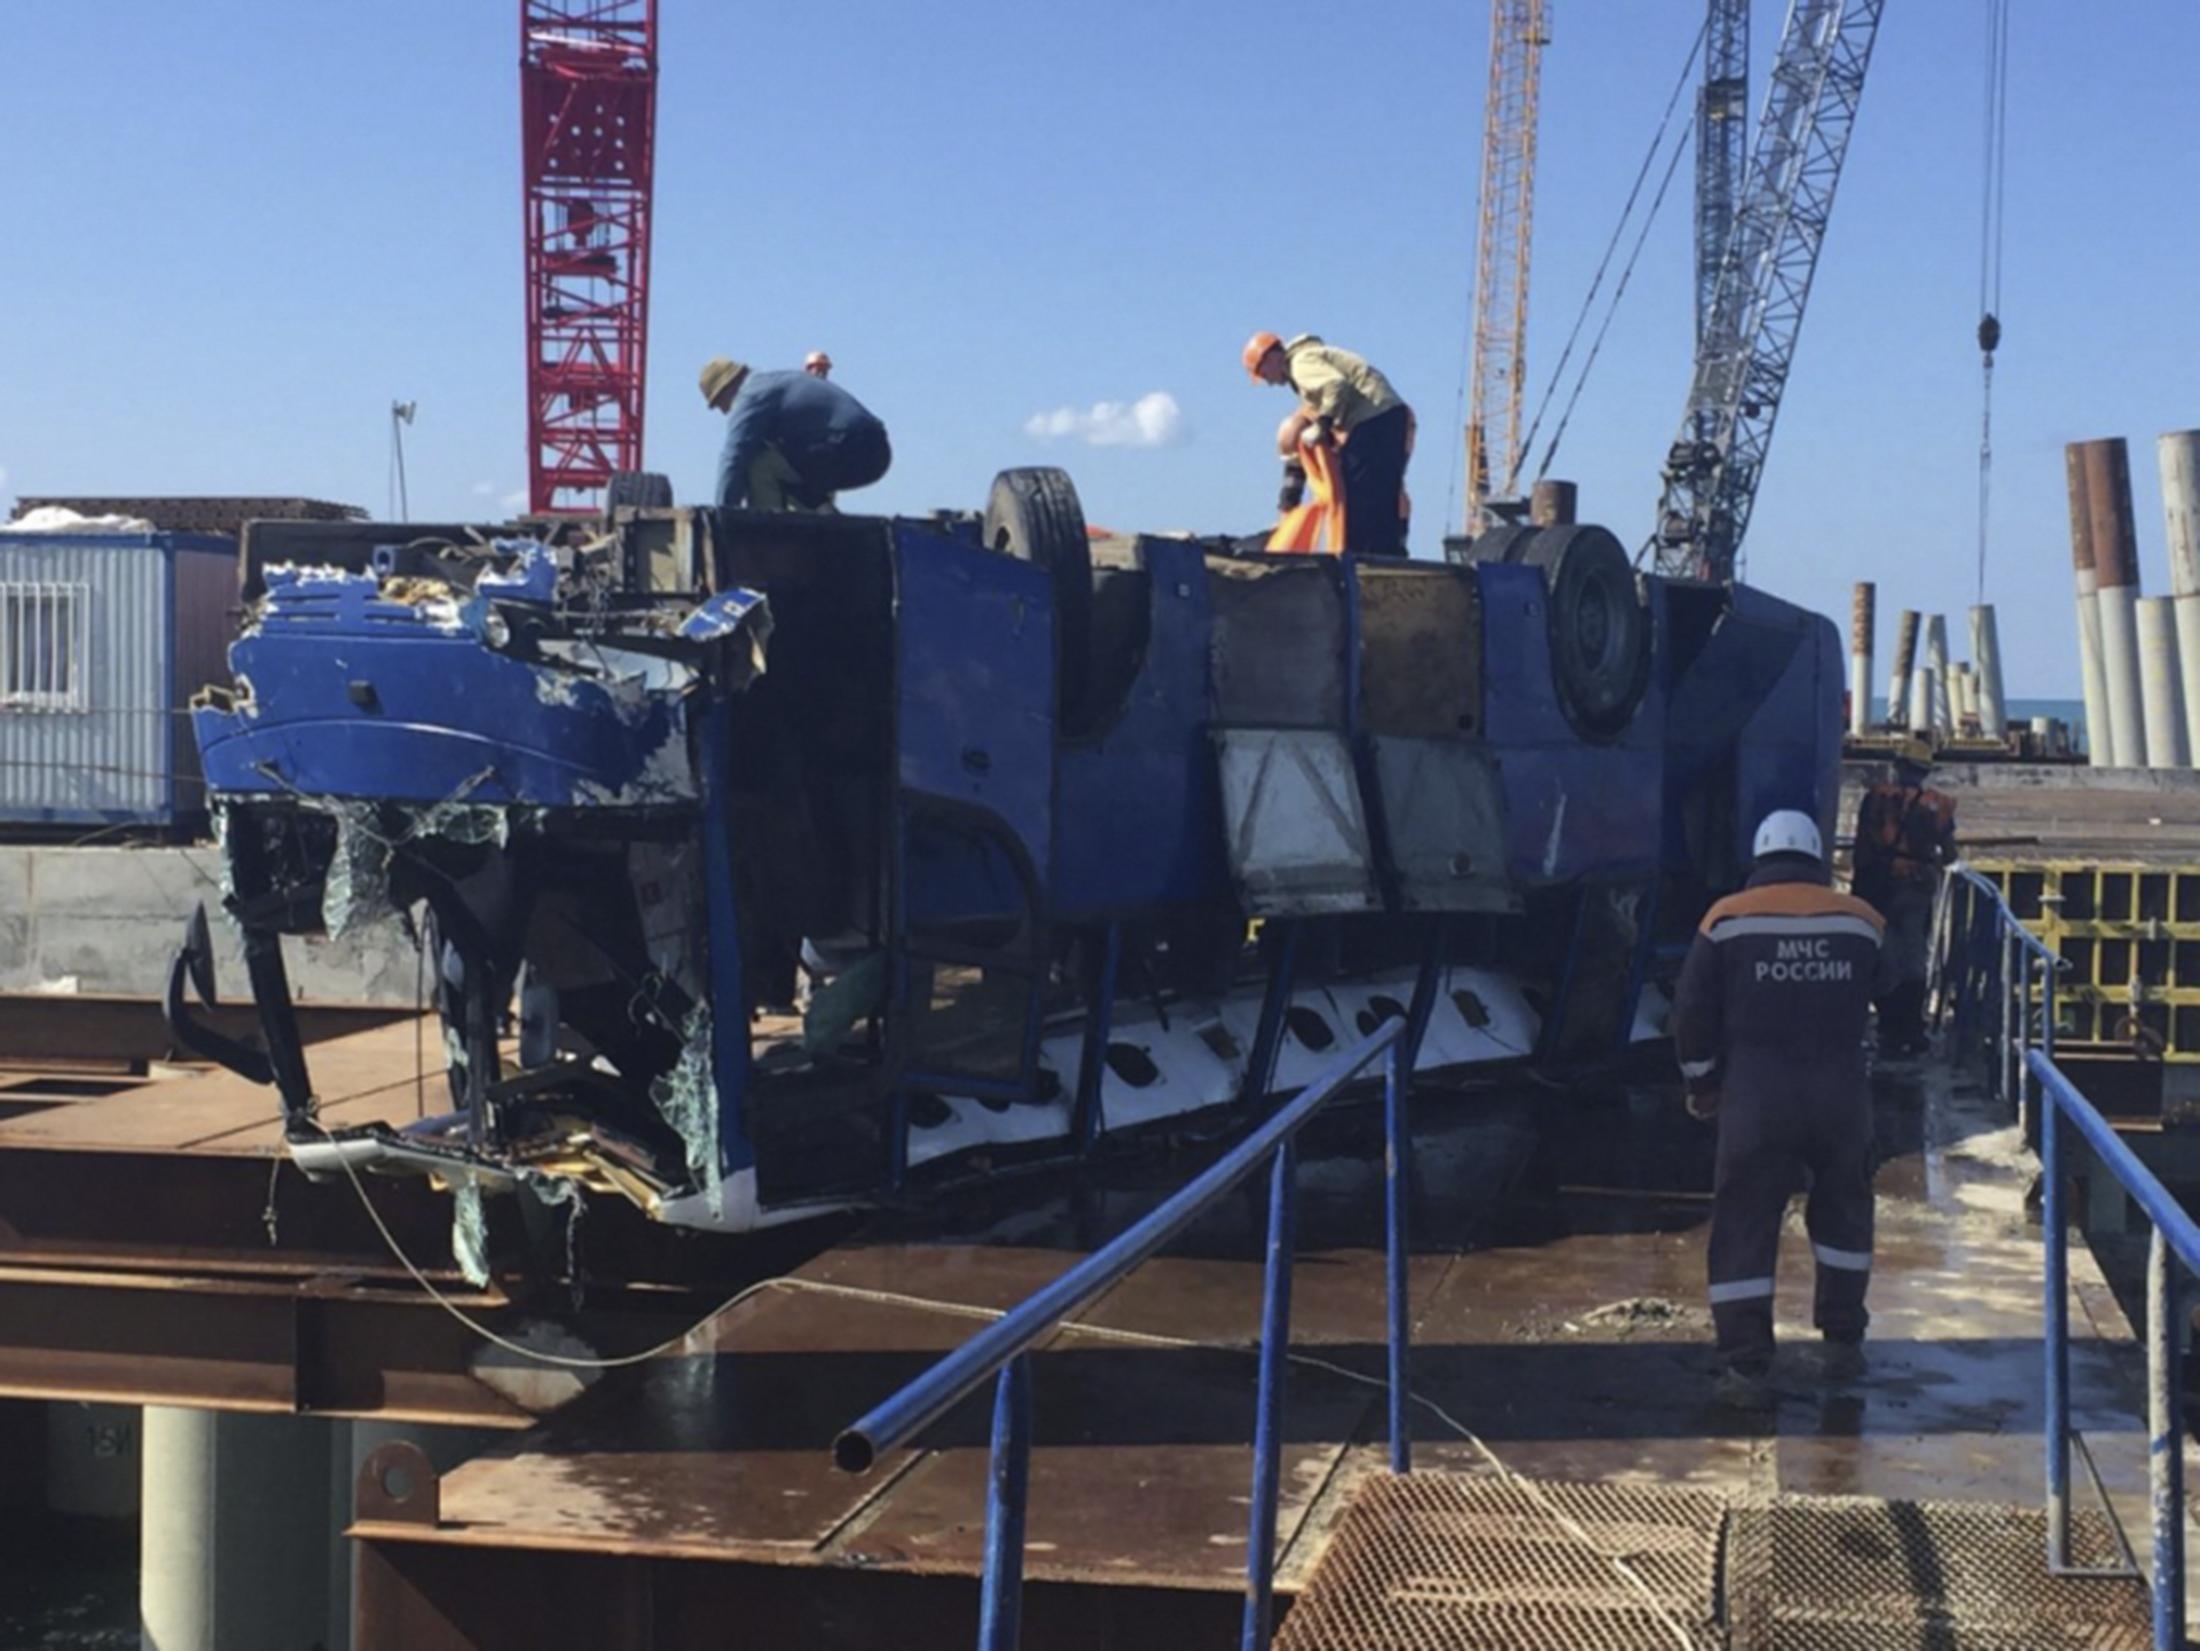 The damaged bus was hauled from the Black Sea after plunging off a pier while carrying construction workers near Volna